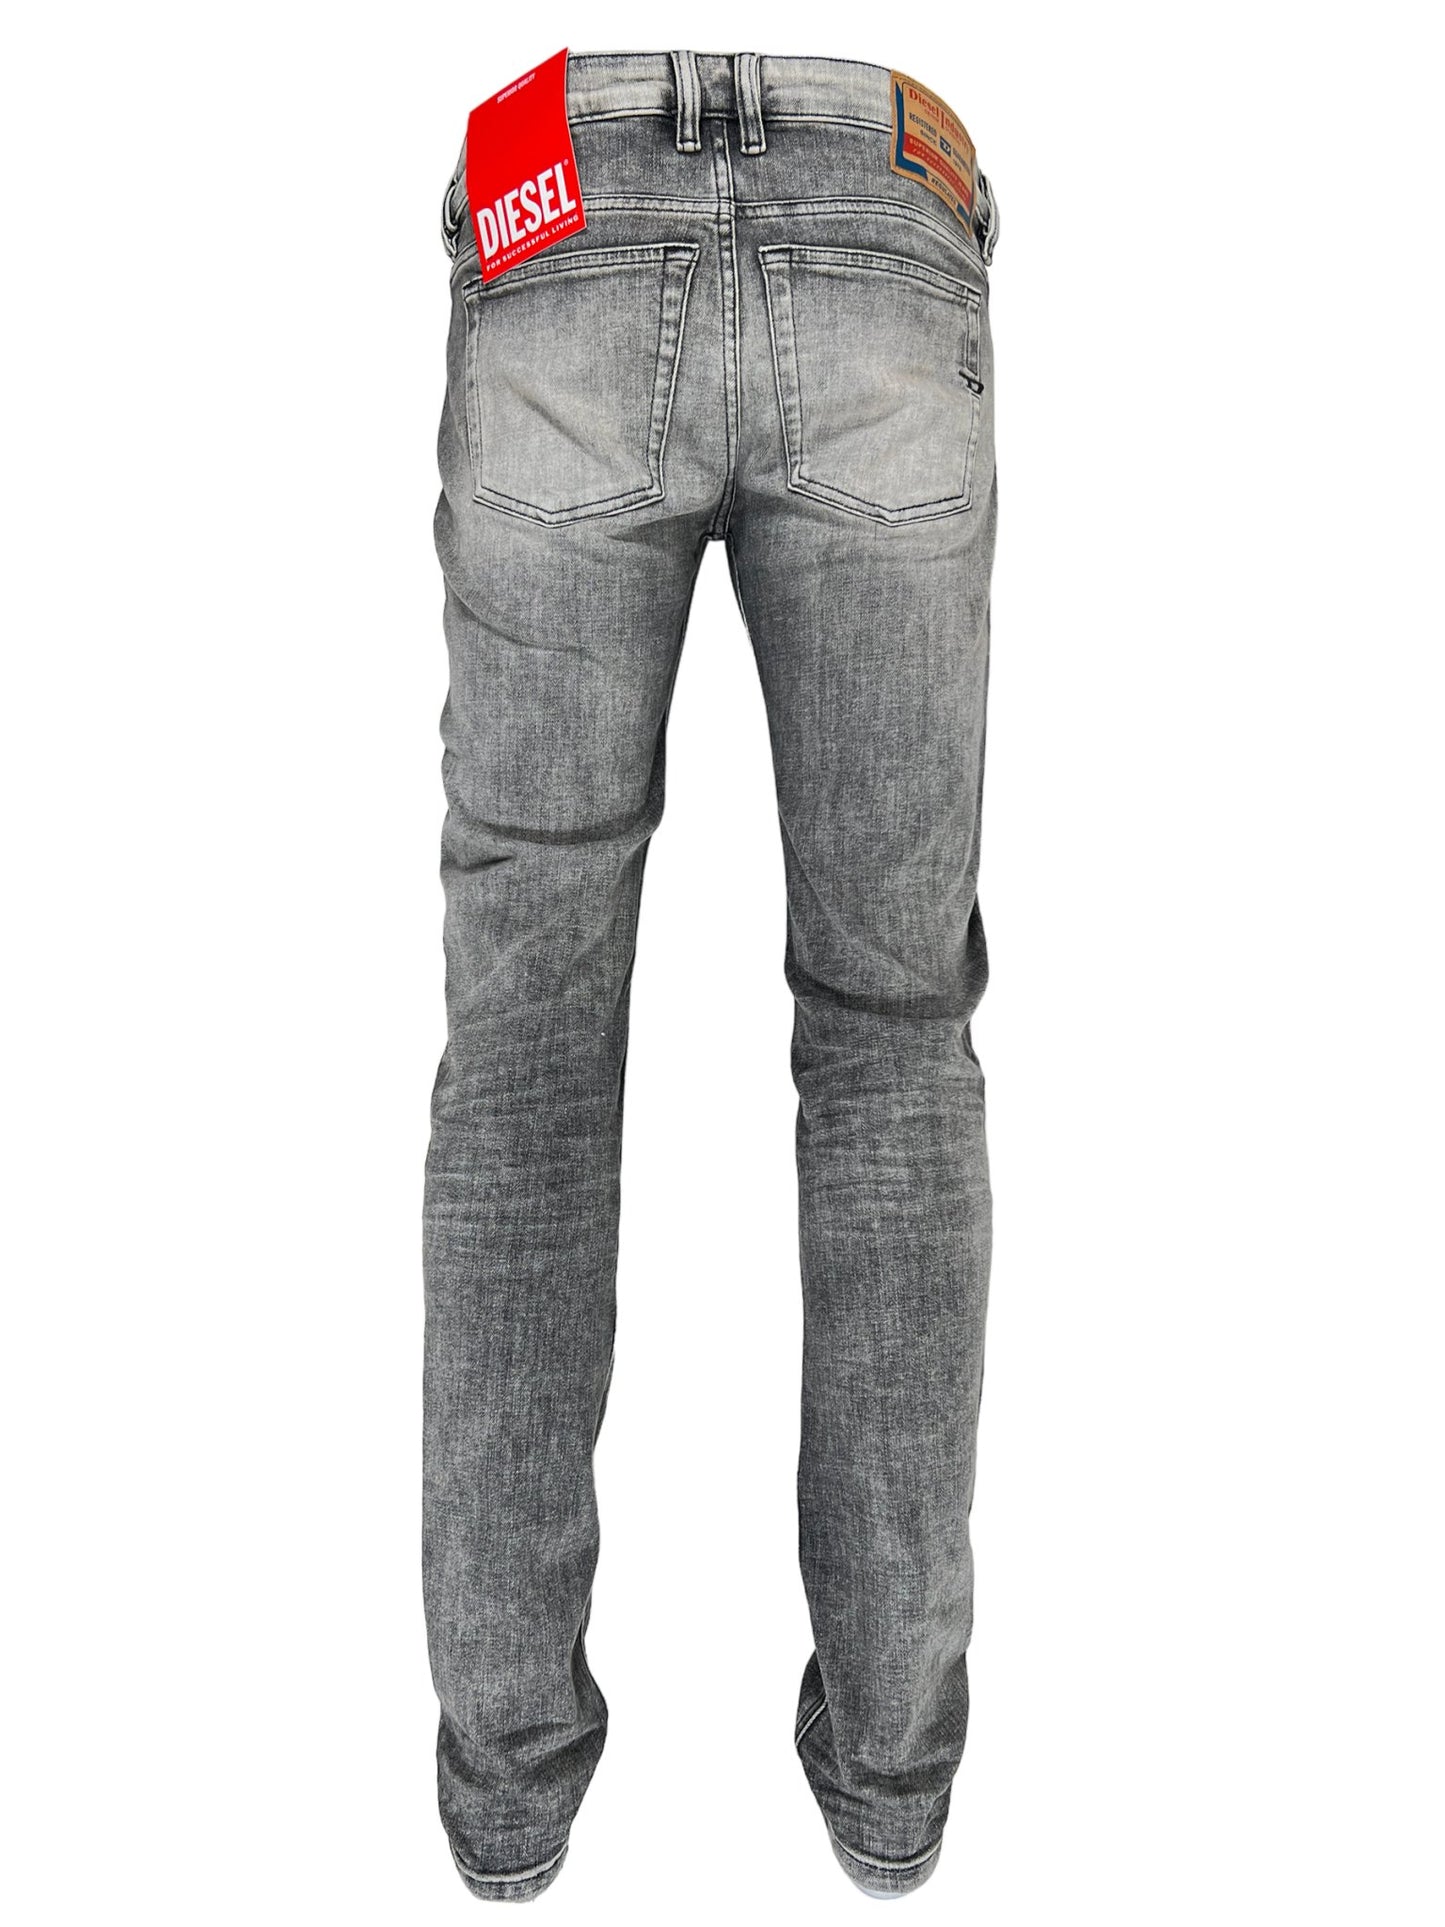 Grey skinny jeans with a visible logo, made from organic cotton by DIESEL 1979 SLEENKER 9H74.